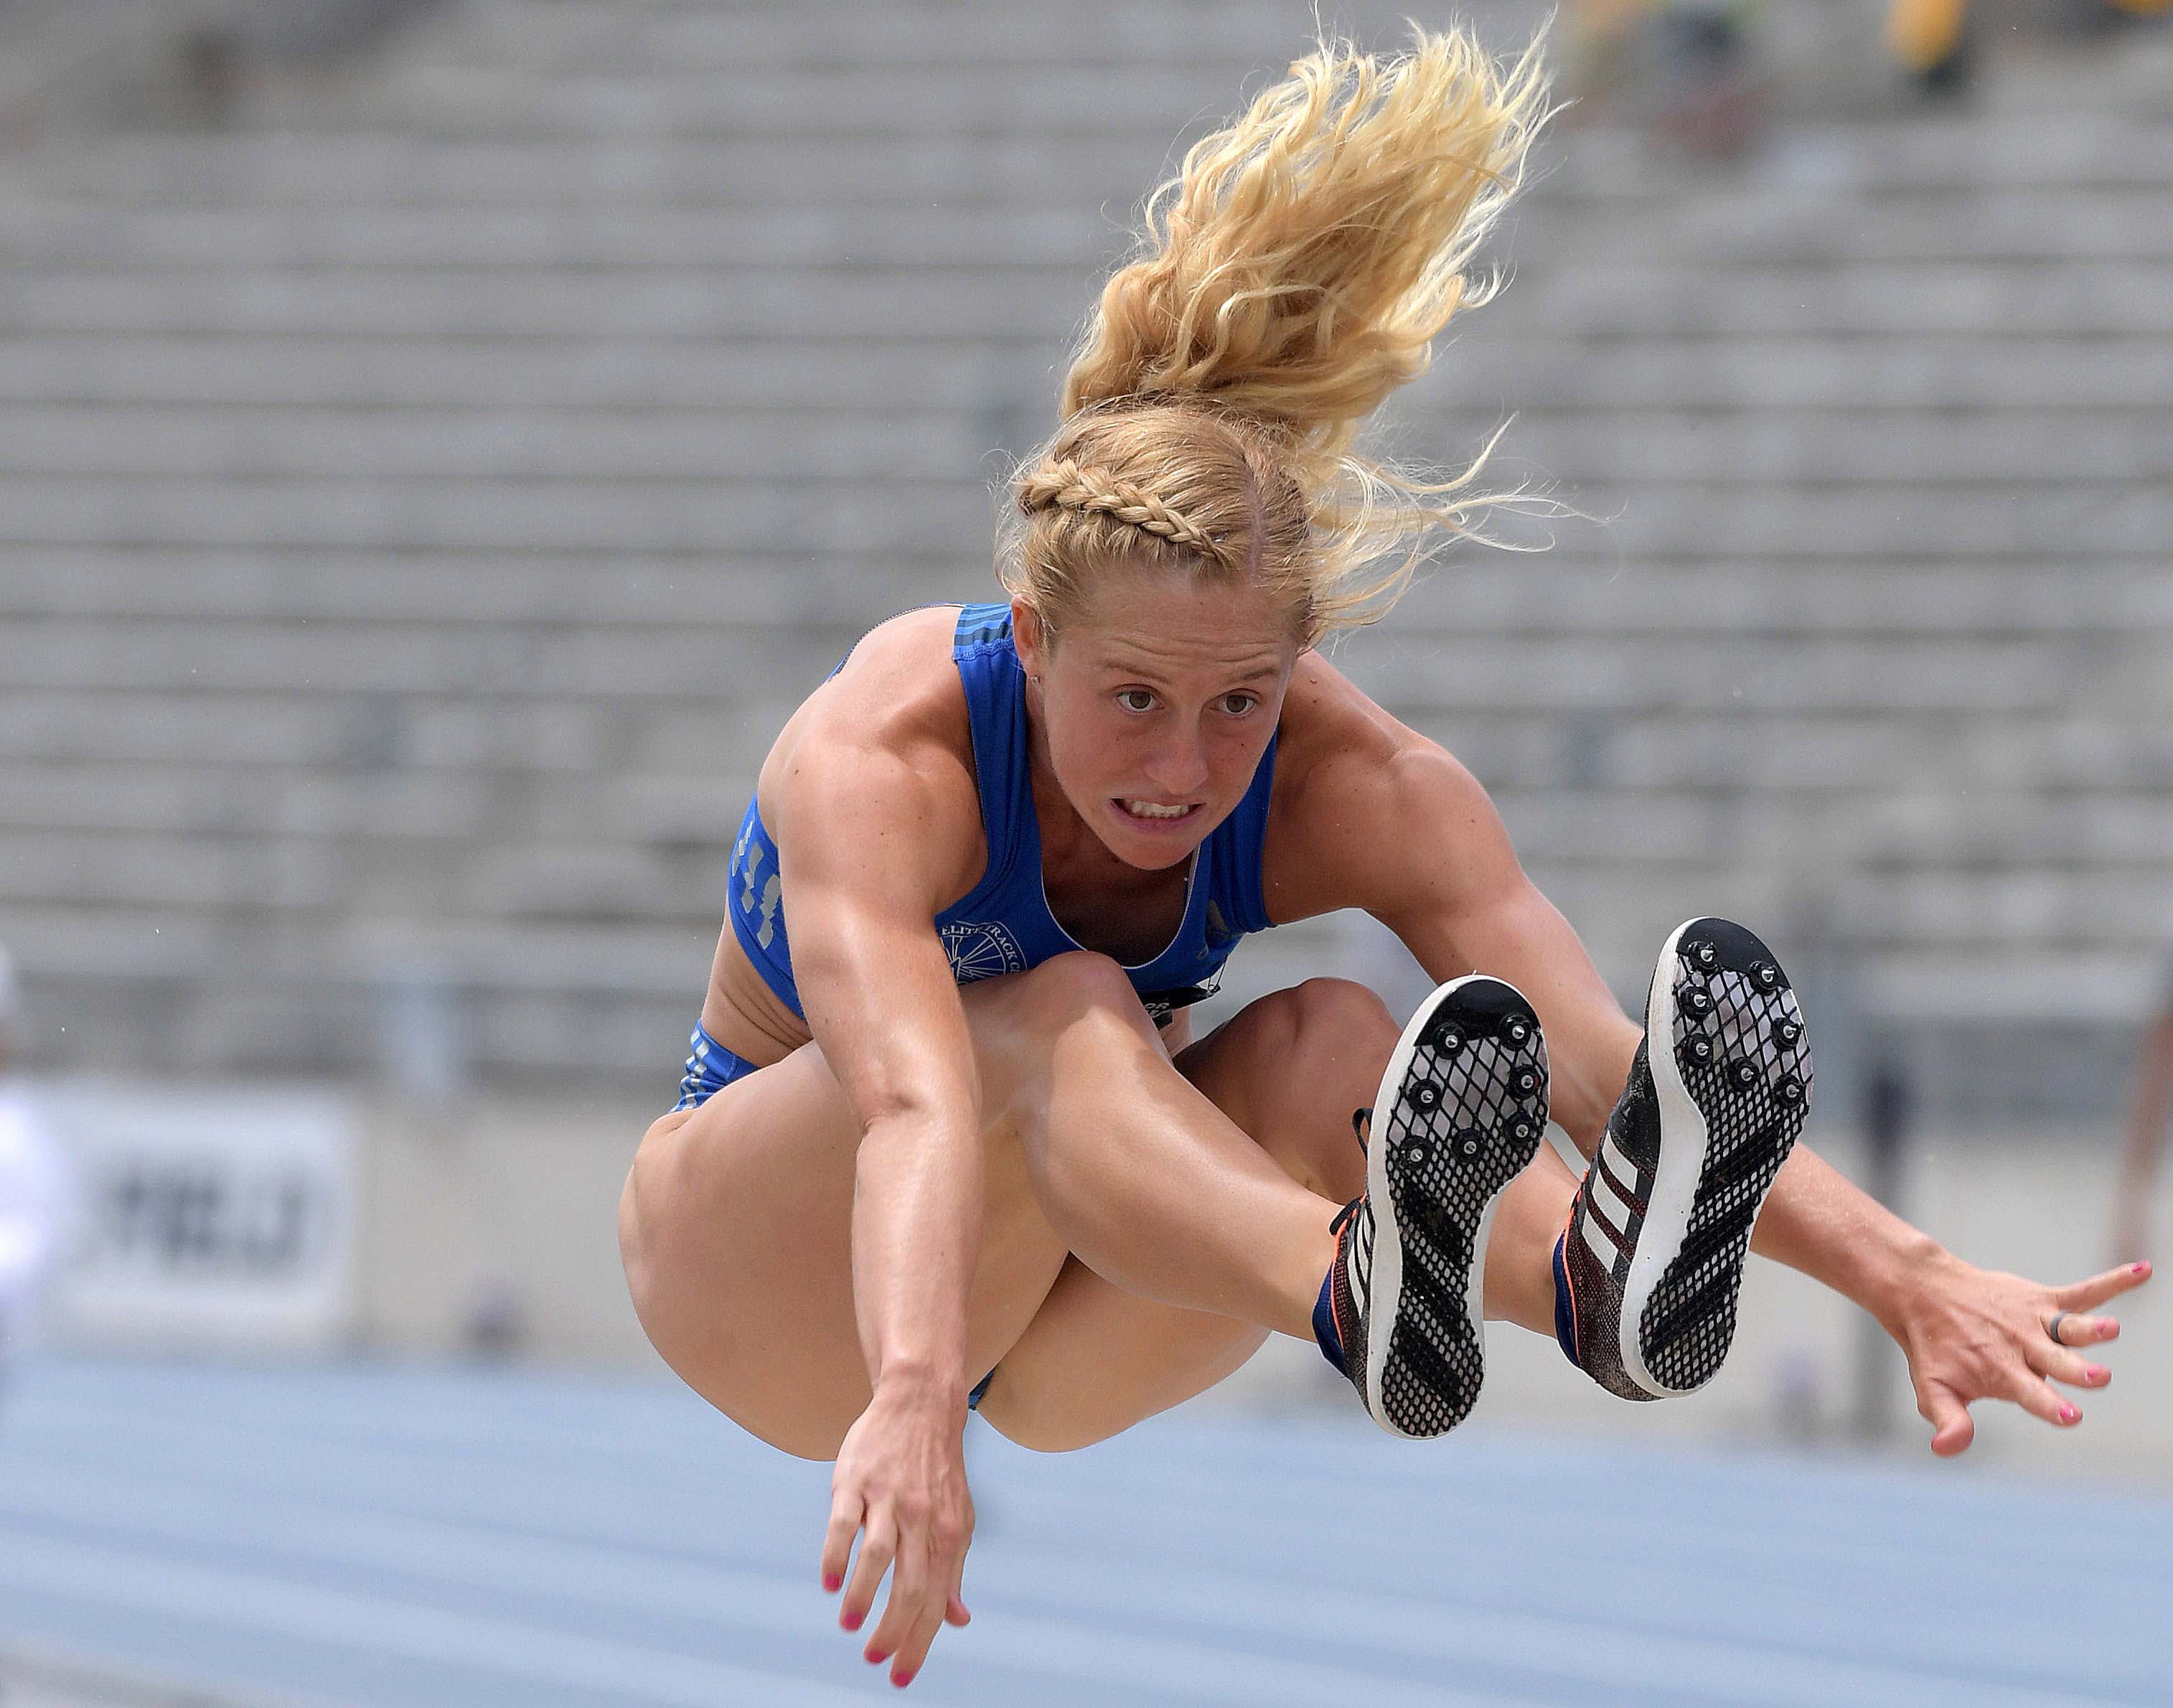 Allison Reaser jumps 20-0 1/4 (6.10m) in the heptathlon long jump during the USA Championships at Drake Stadium in Des Moines, Iowa.